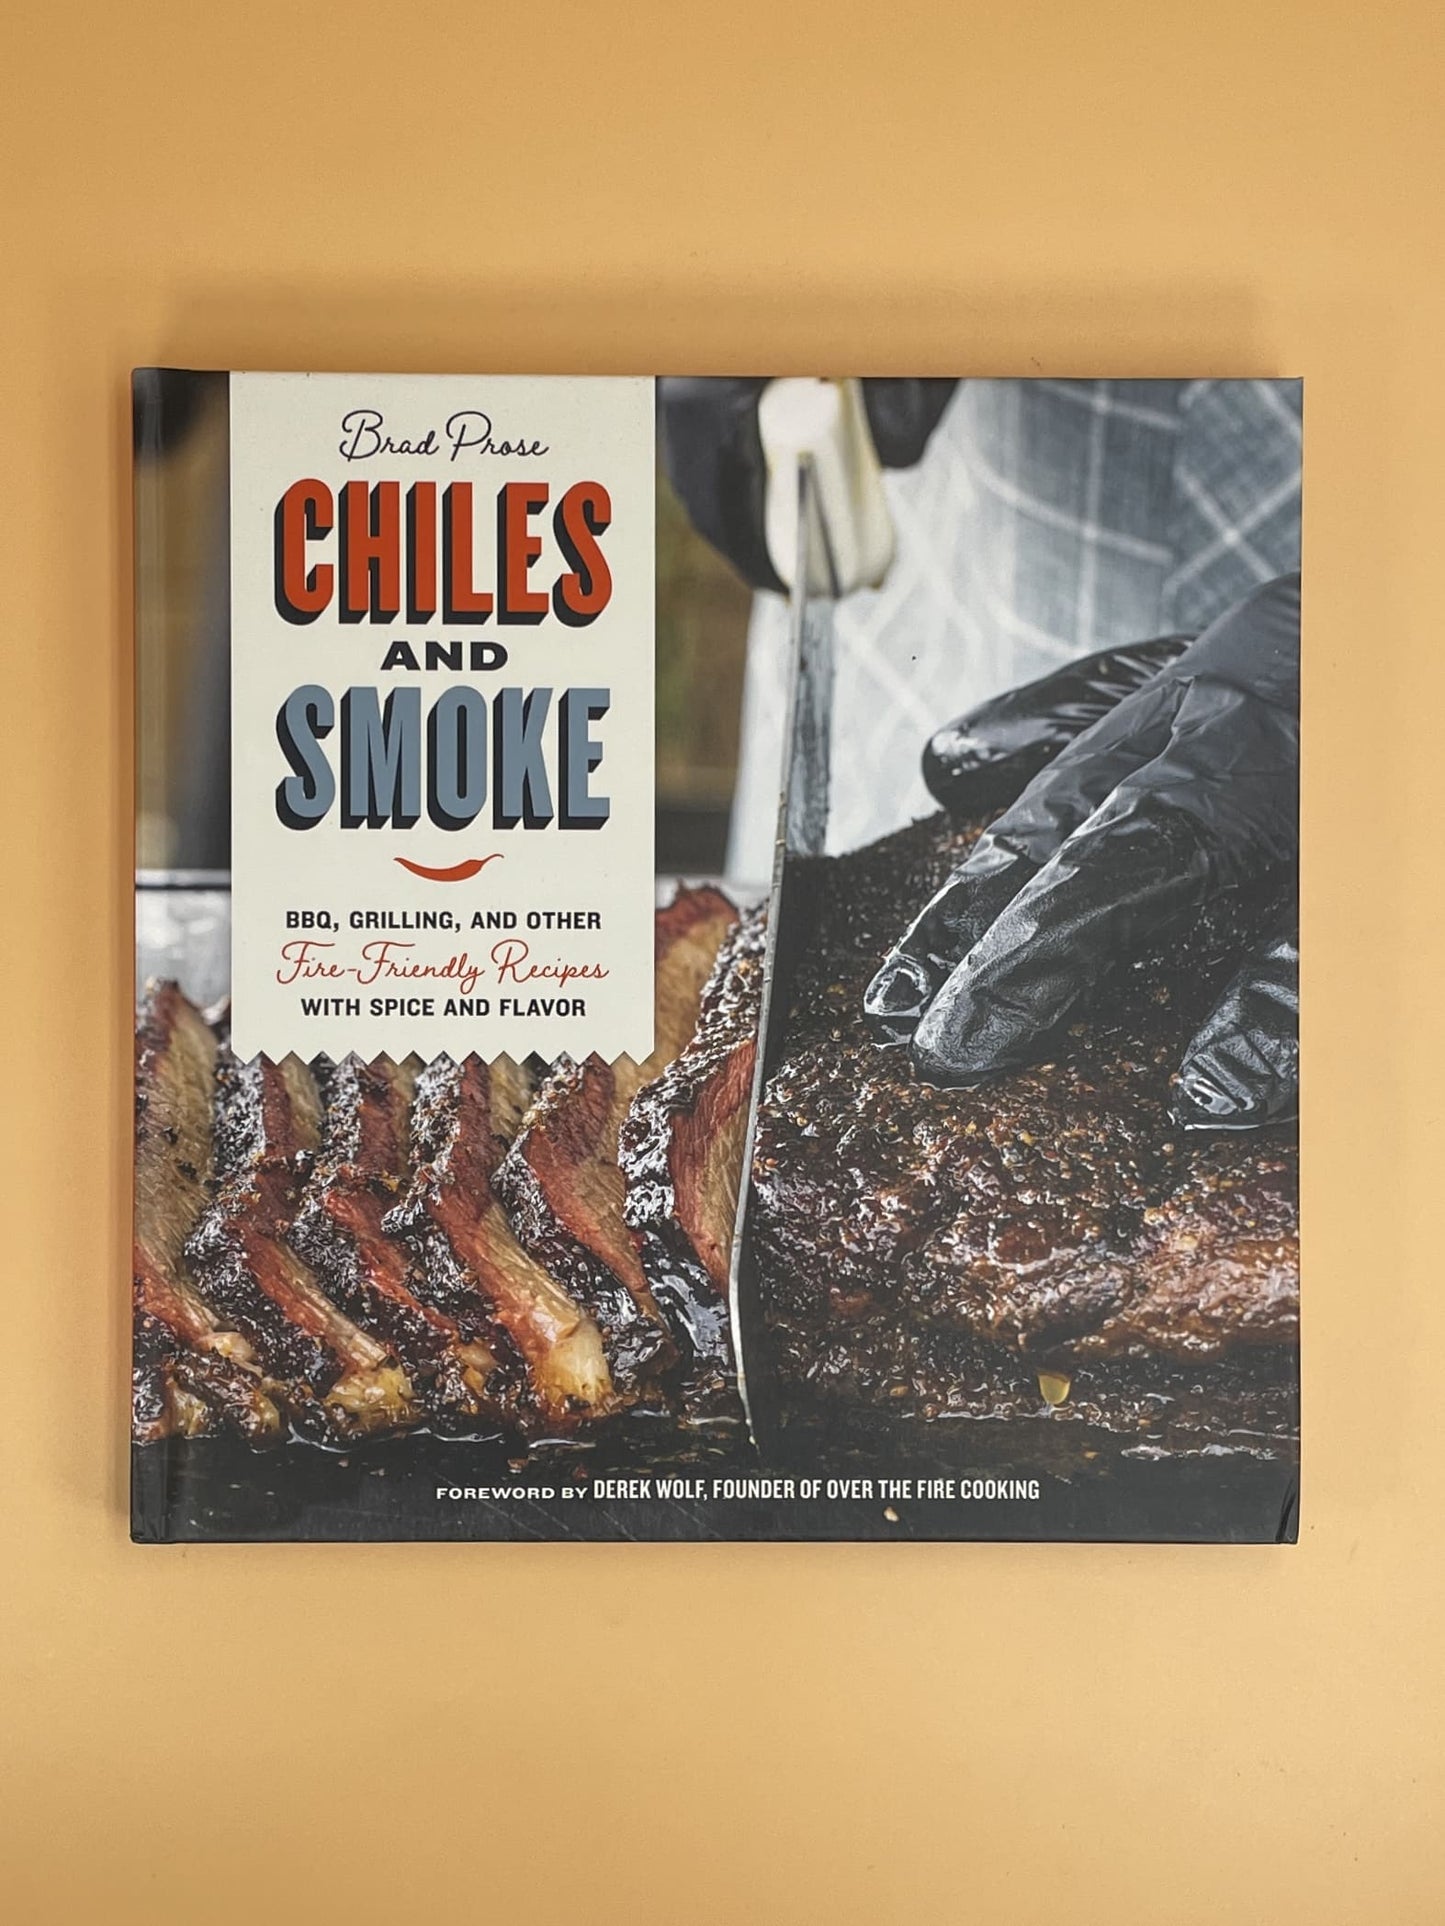 Chiles and Smoke: Bbq, Grilling, and Other Fire-Friendly Recipes with Spice and Flavor (Brad Prose)